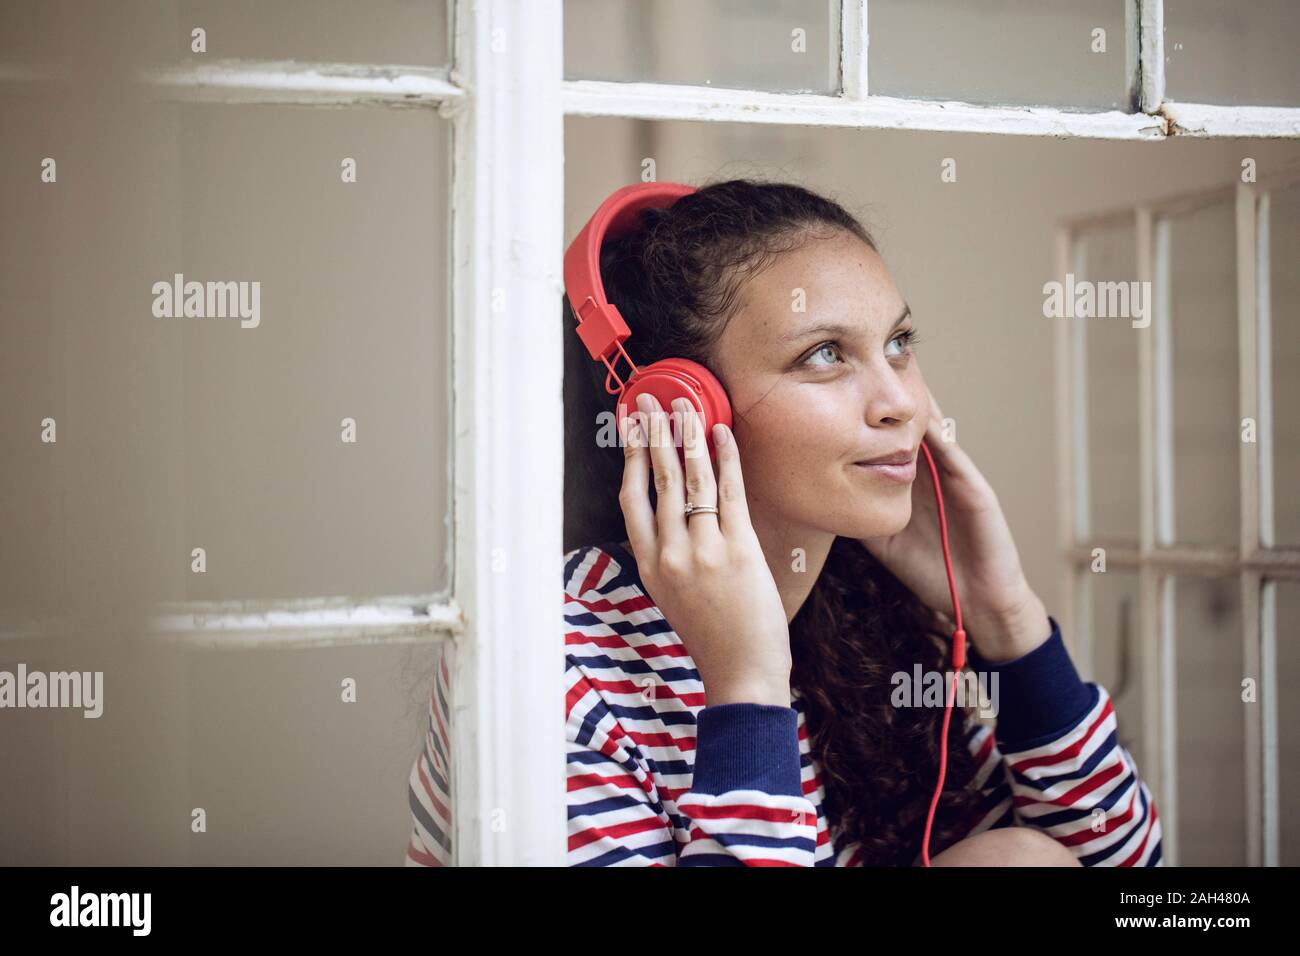 Young woman at the window listening to music Stock Photo